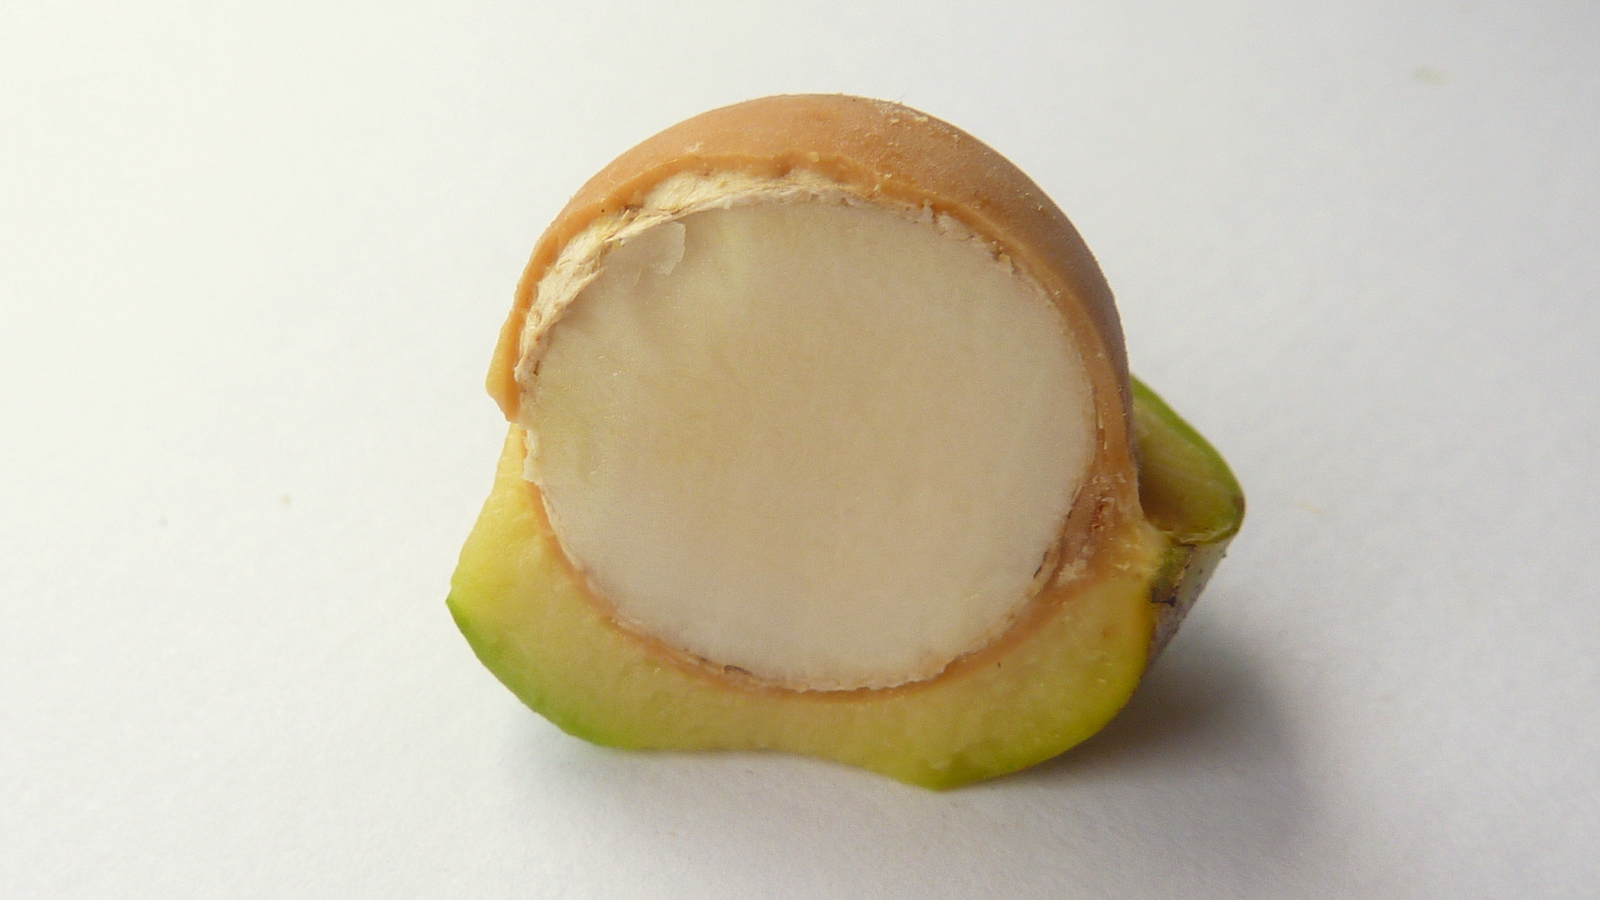 a nut with a half eaten apple showing the inside of it